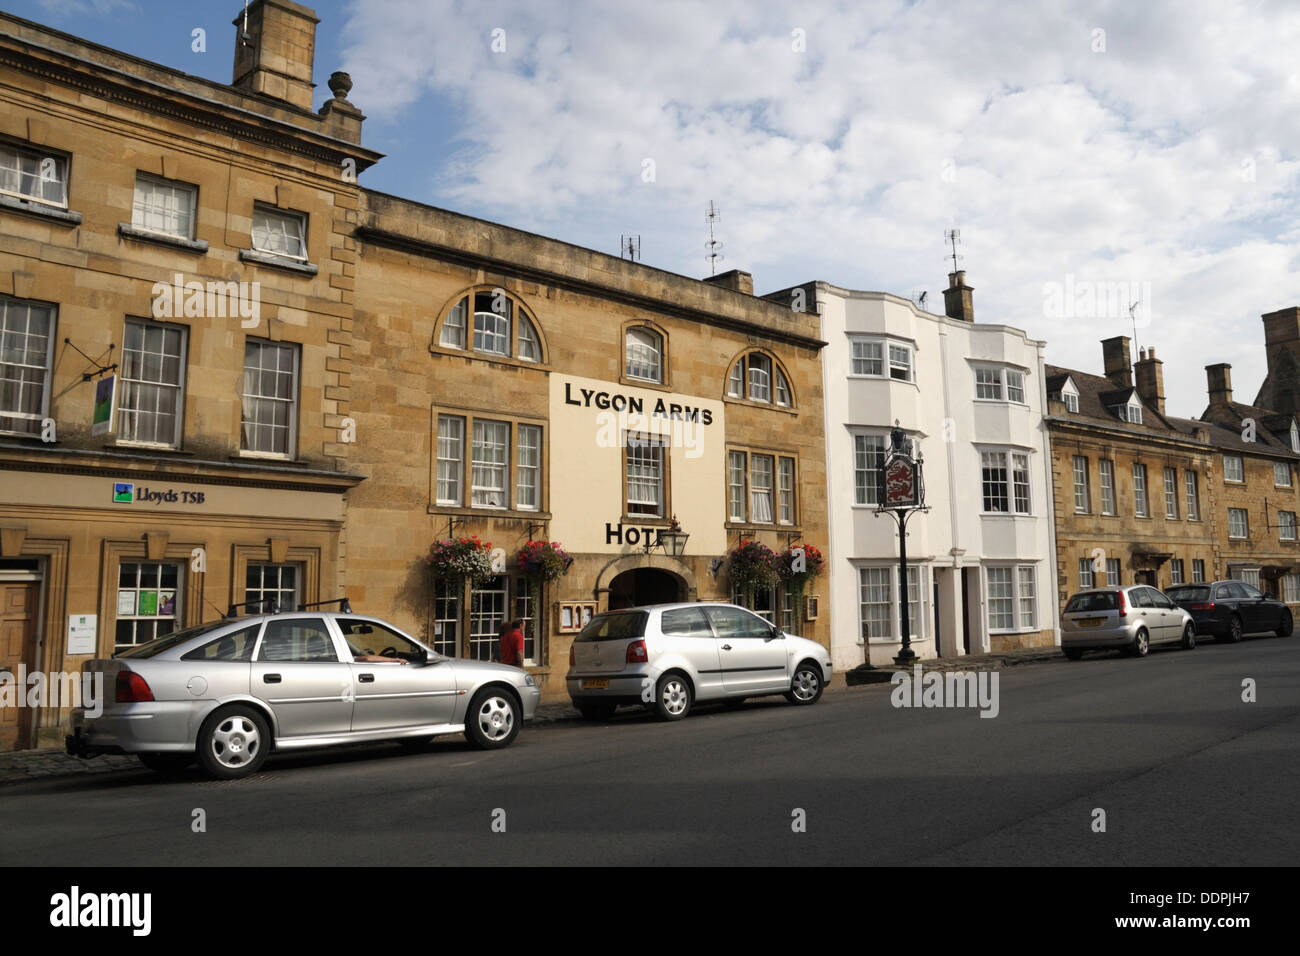 Chipping Campden High Street England, country town in the English Cotswolds Lygon Arms, public house grade II listed building Stock Photo